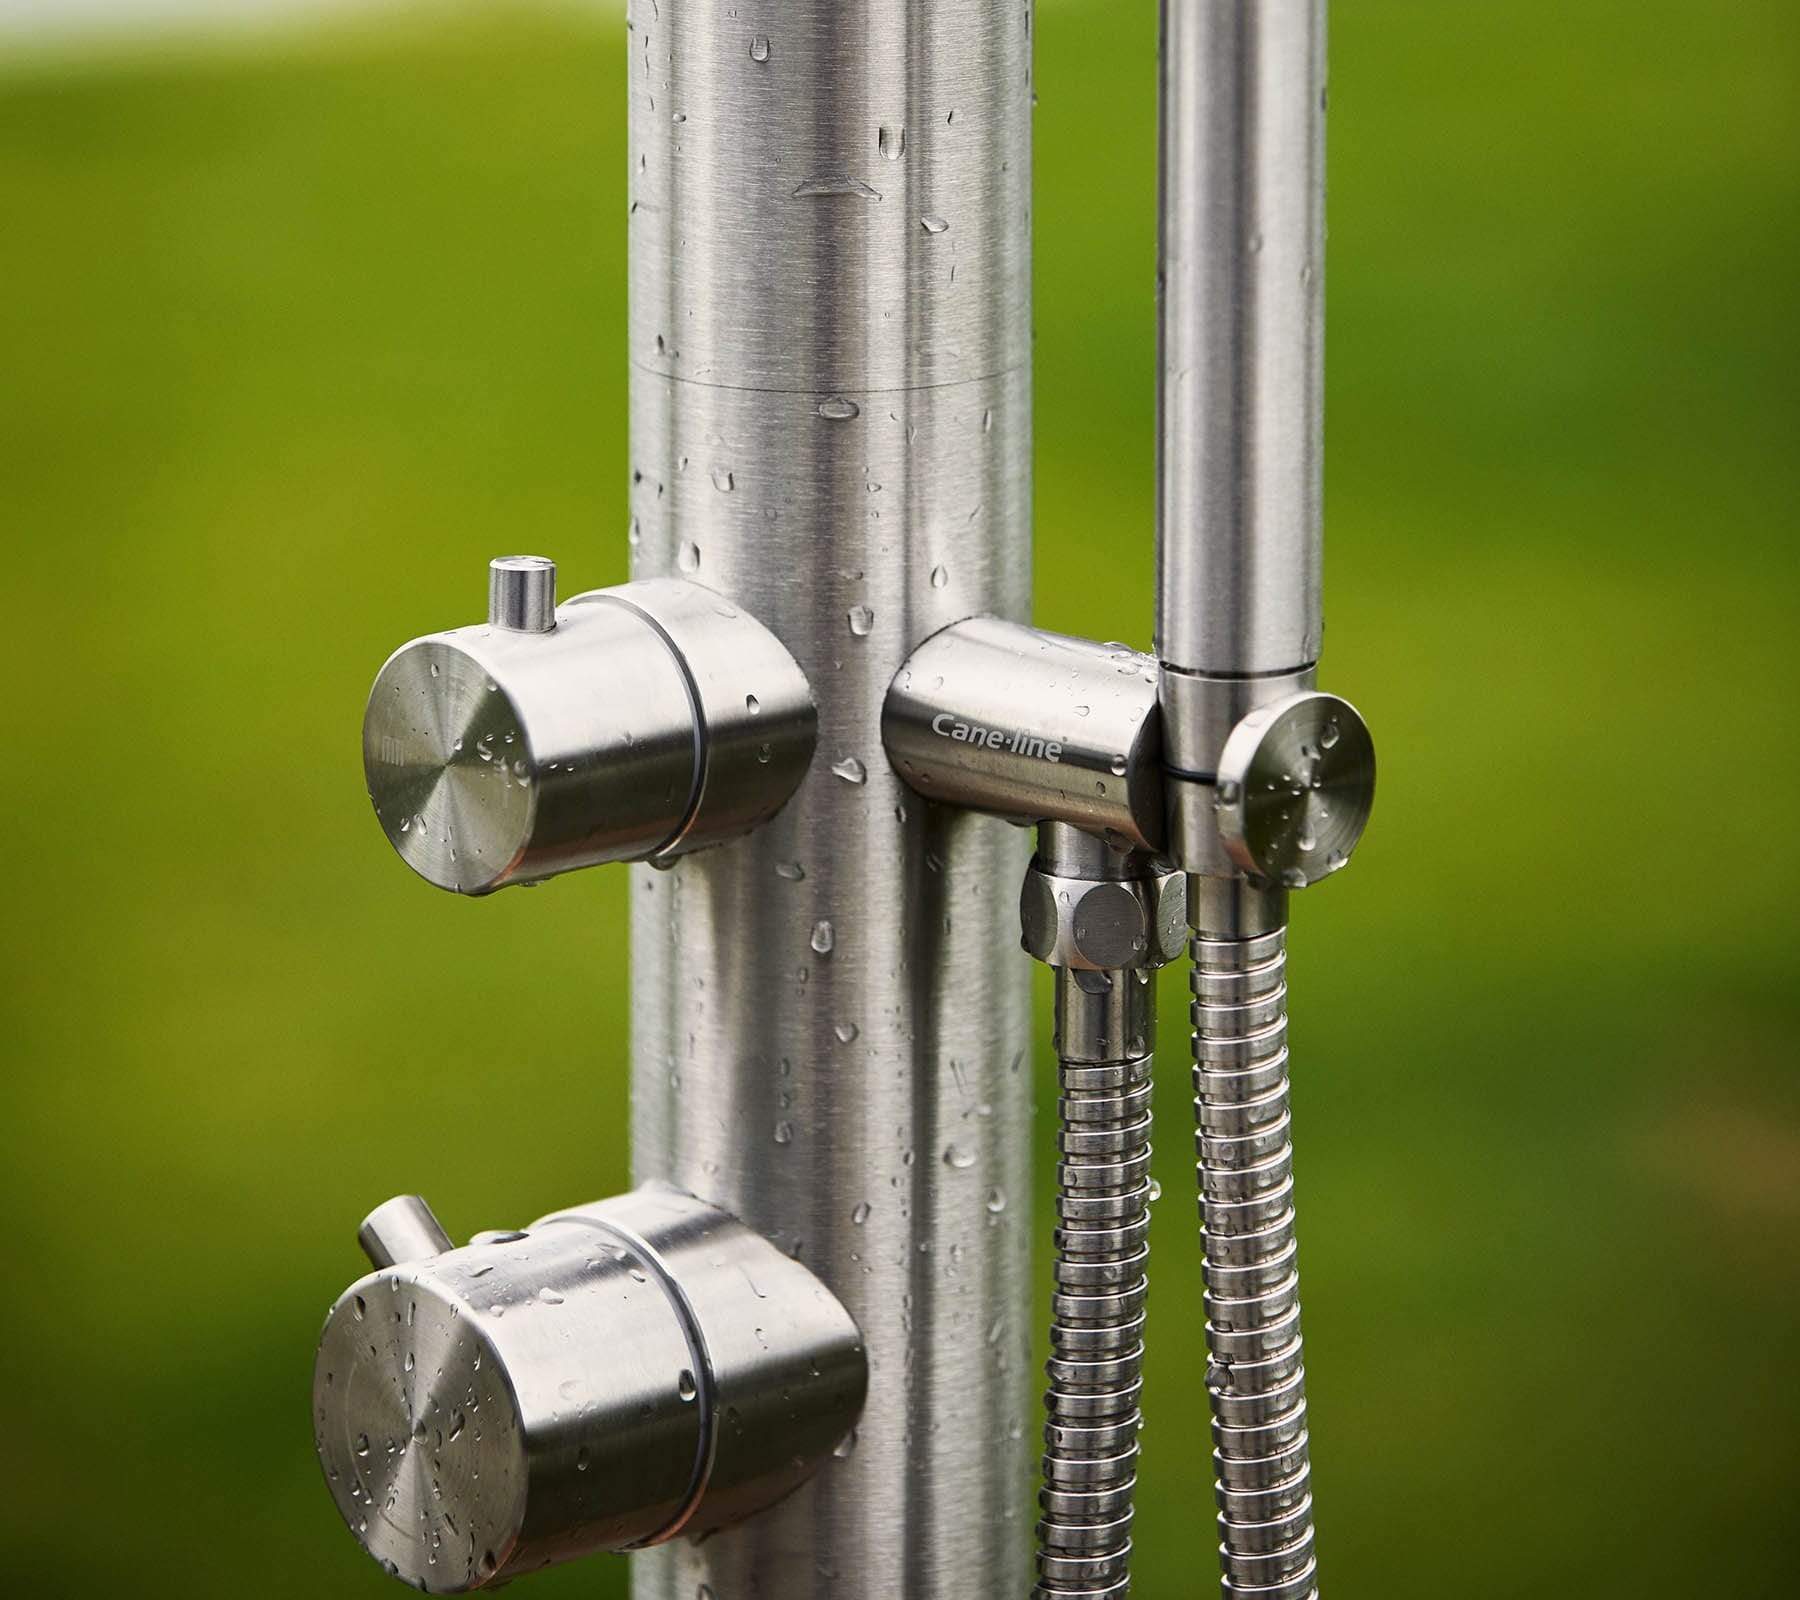 Boxhill's Lagoon Outdoor Shower lifestyle image close up view